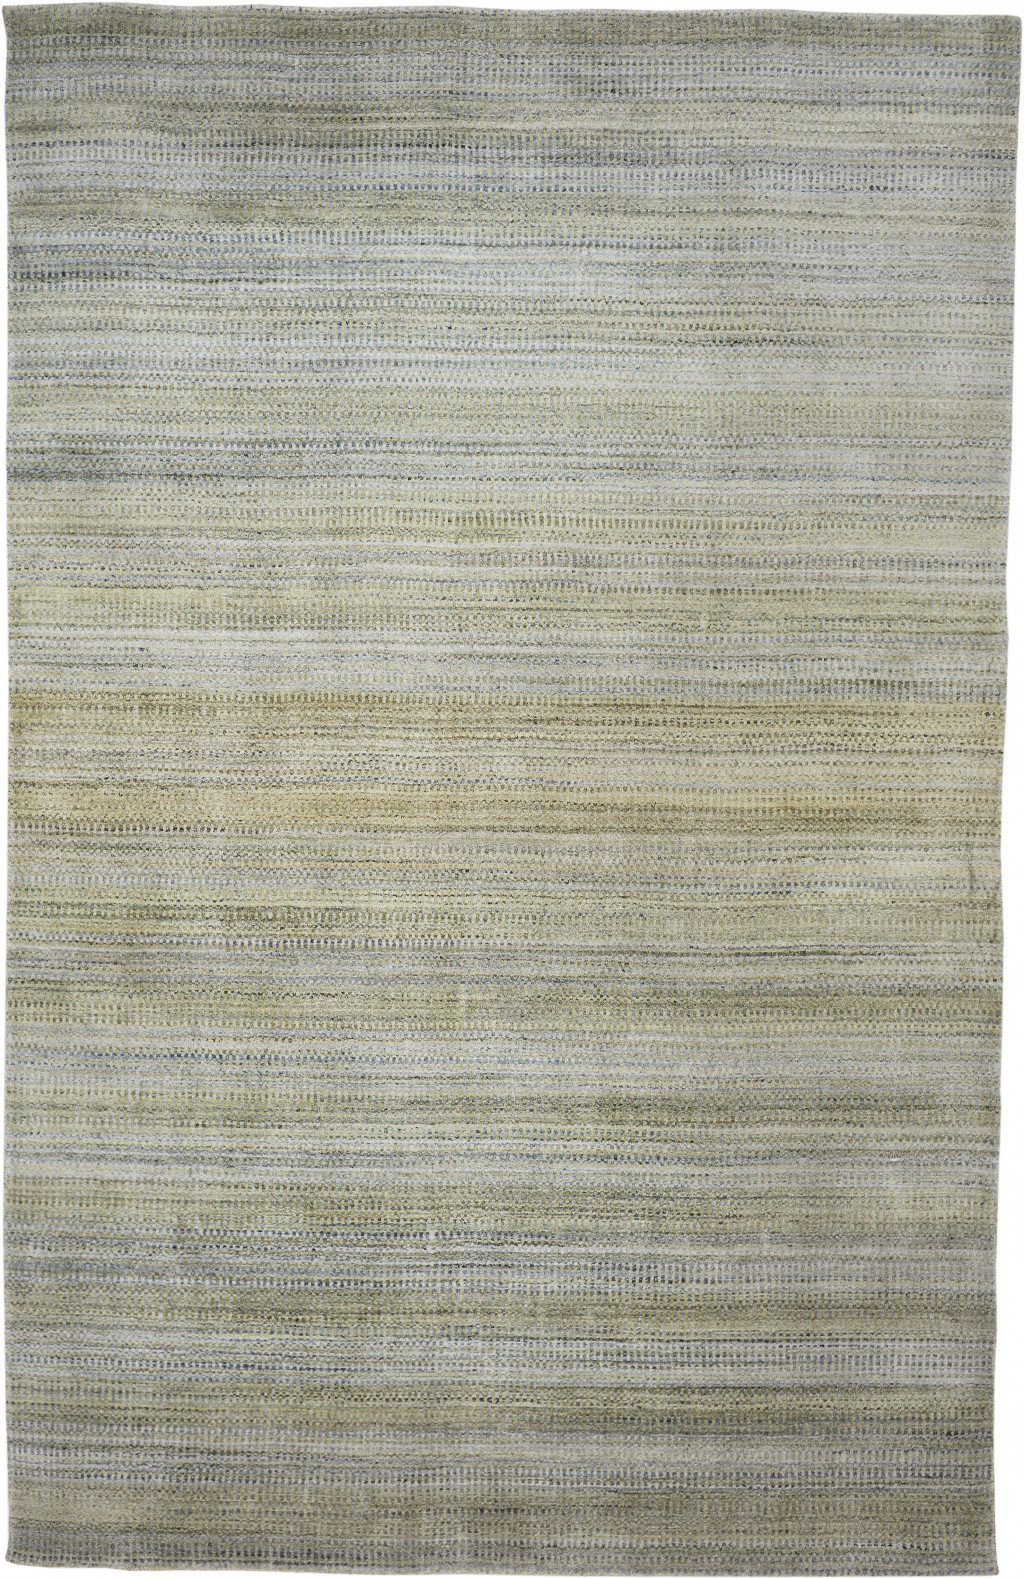 4' X 6' Green Blue And Tan Ombre Hand Woven Area Rug-511722-1